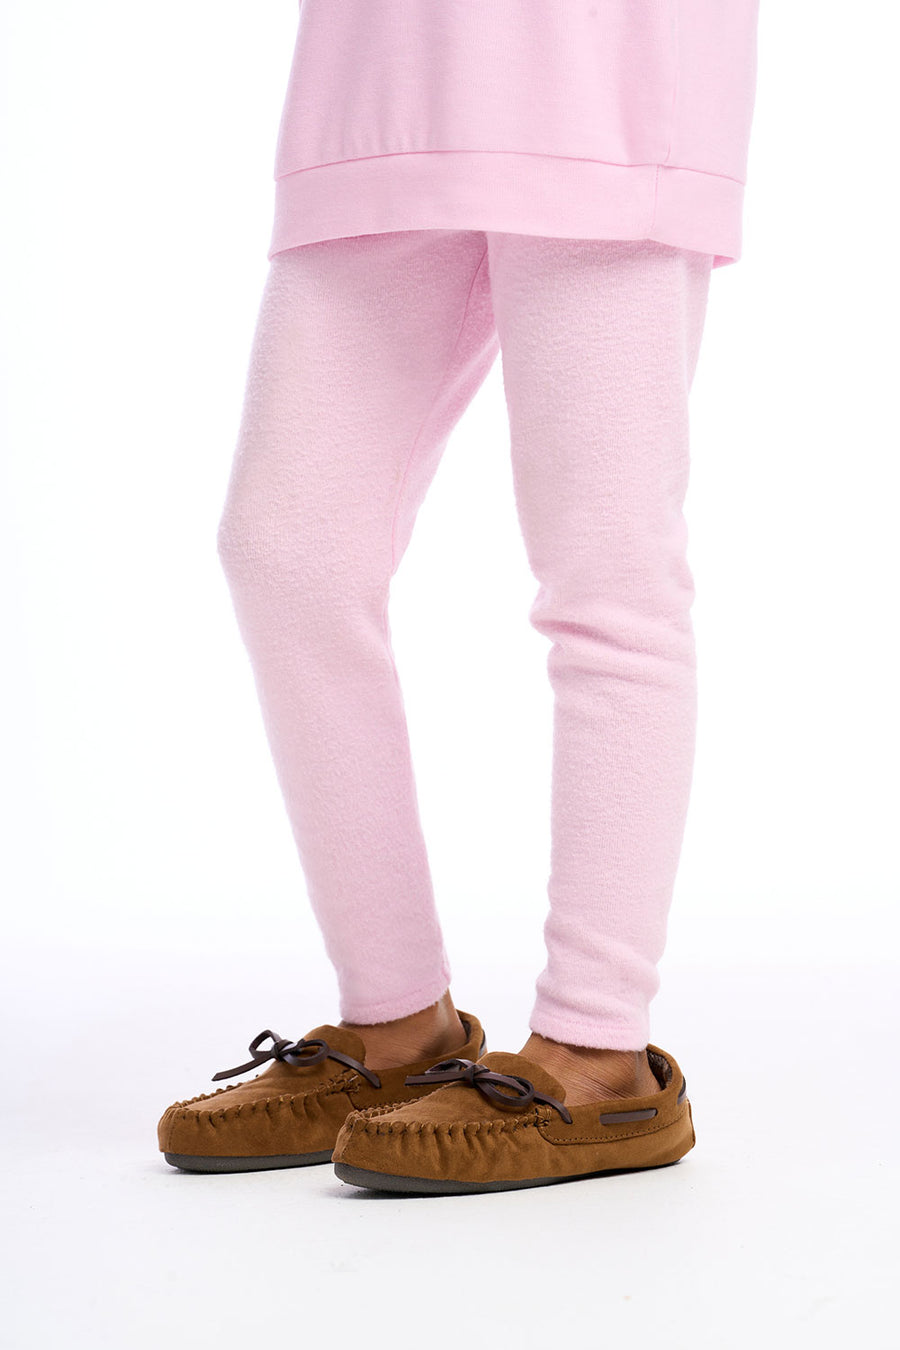 Recycled Bliss Knit Leggings Girls chaserbrand